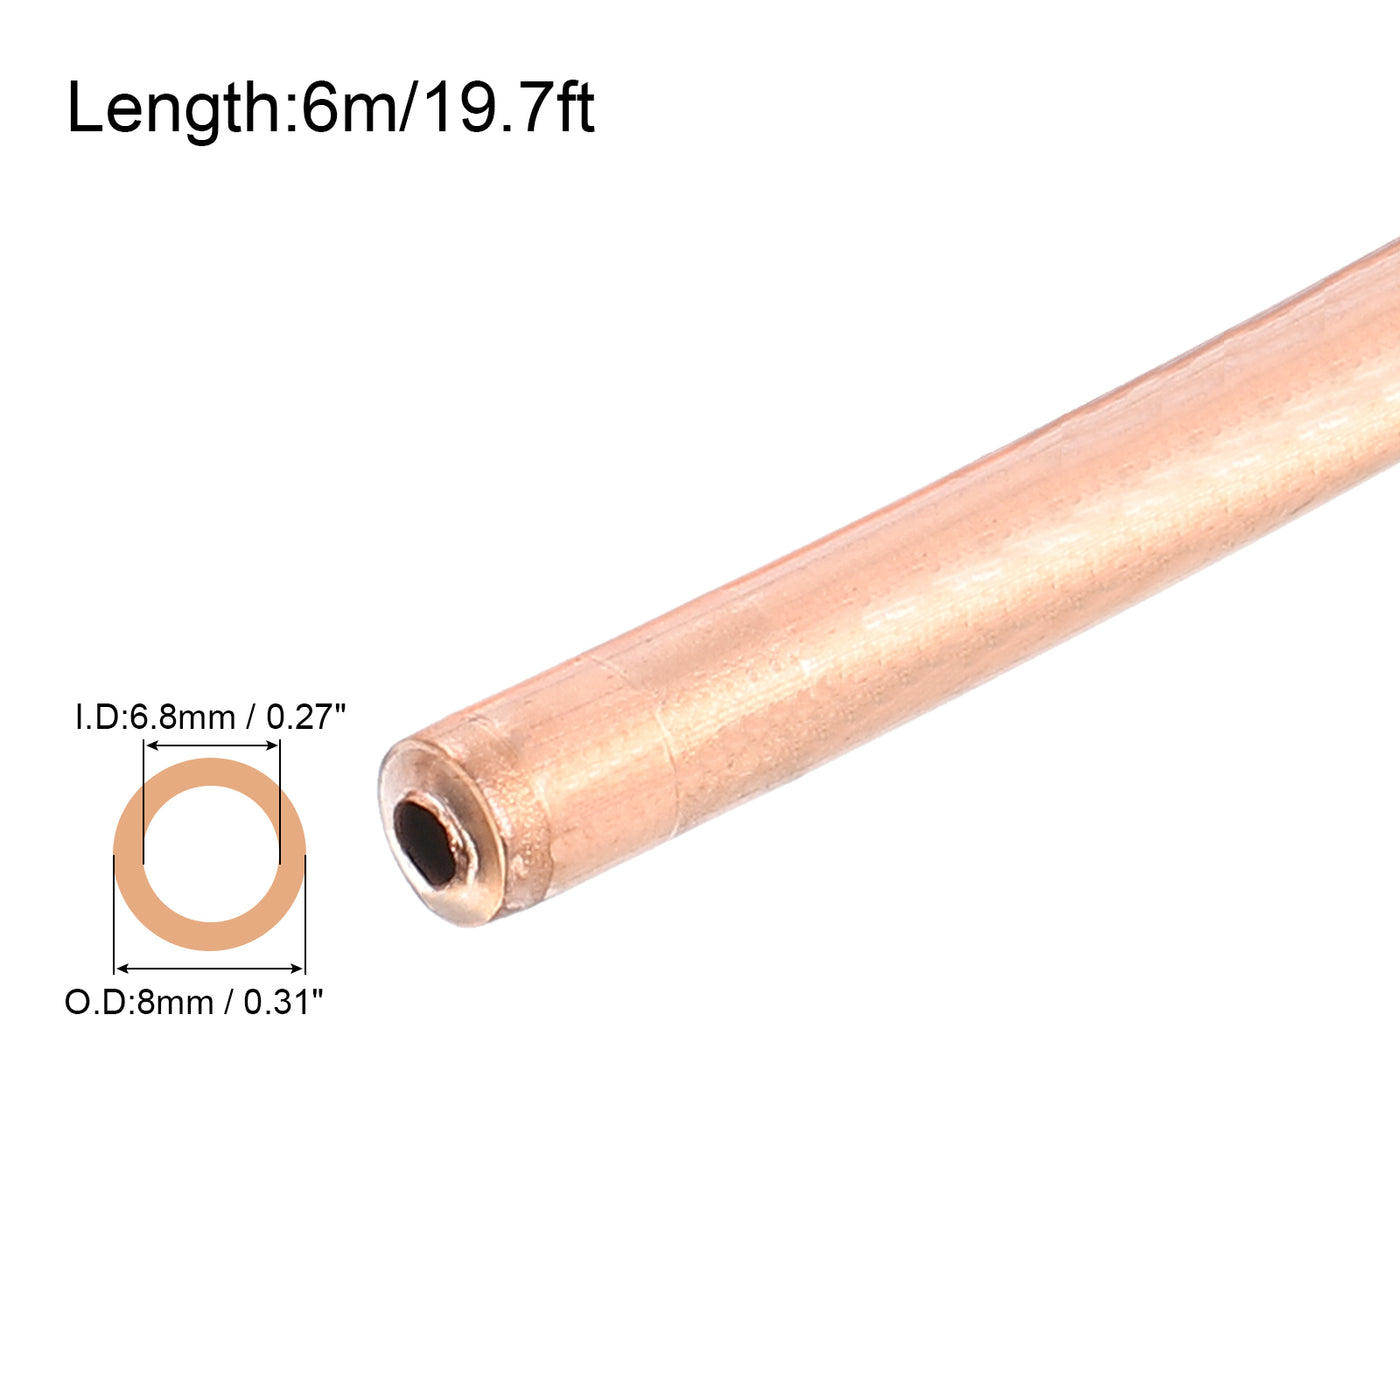 Harfington Copper Tube Refrigeration Tubing 0.31" OD x 0.27" ID x 19.7Ft Seamless Round Pipe Coil for Refrigerator, Freezer, Air Conditioner